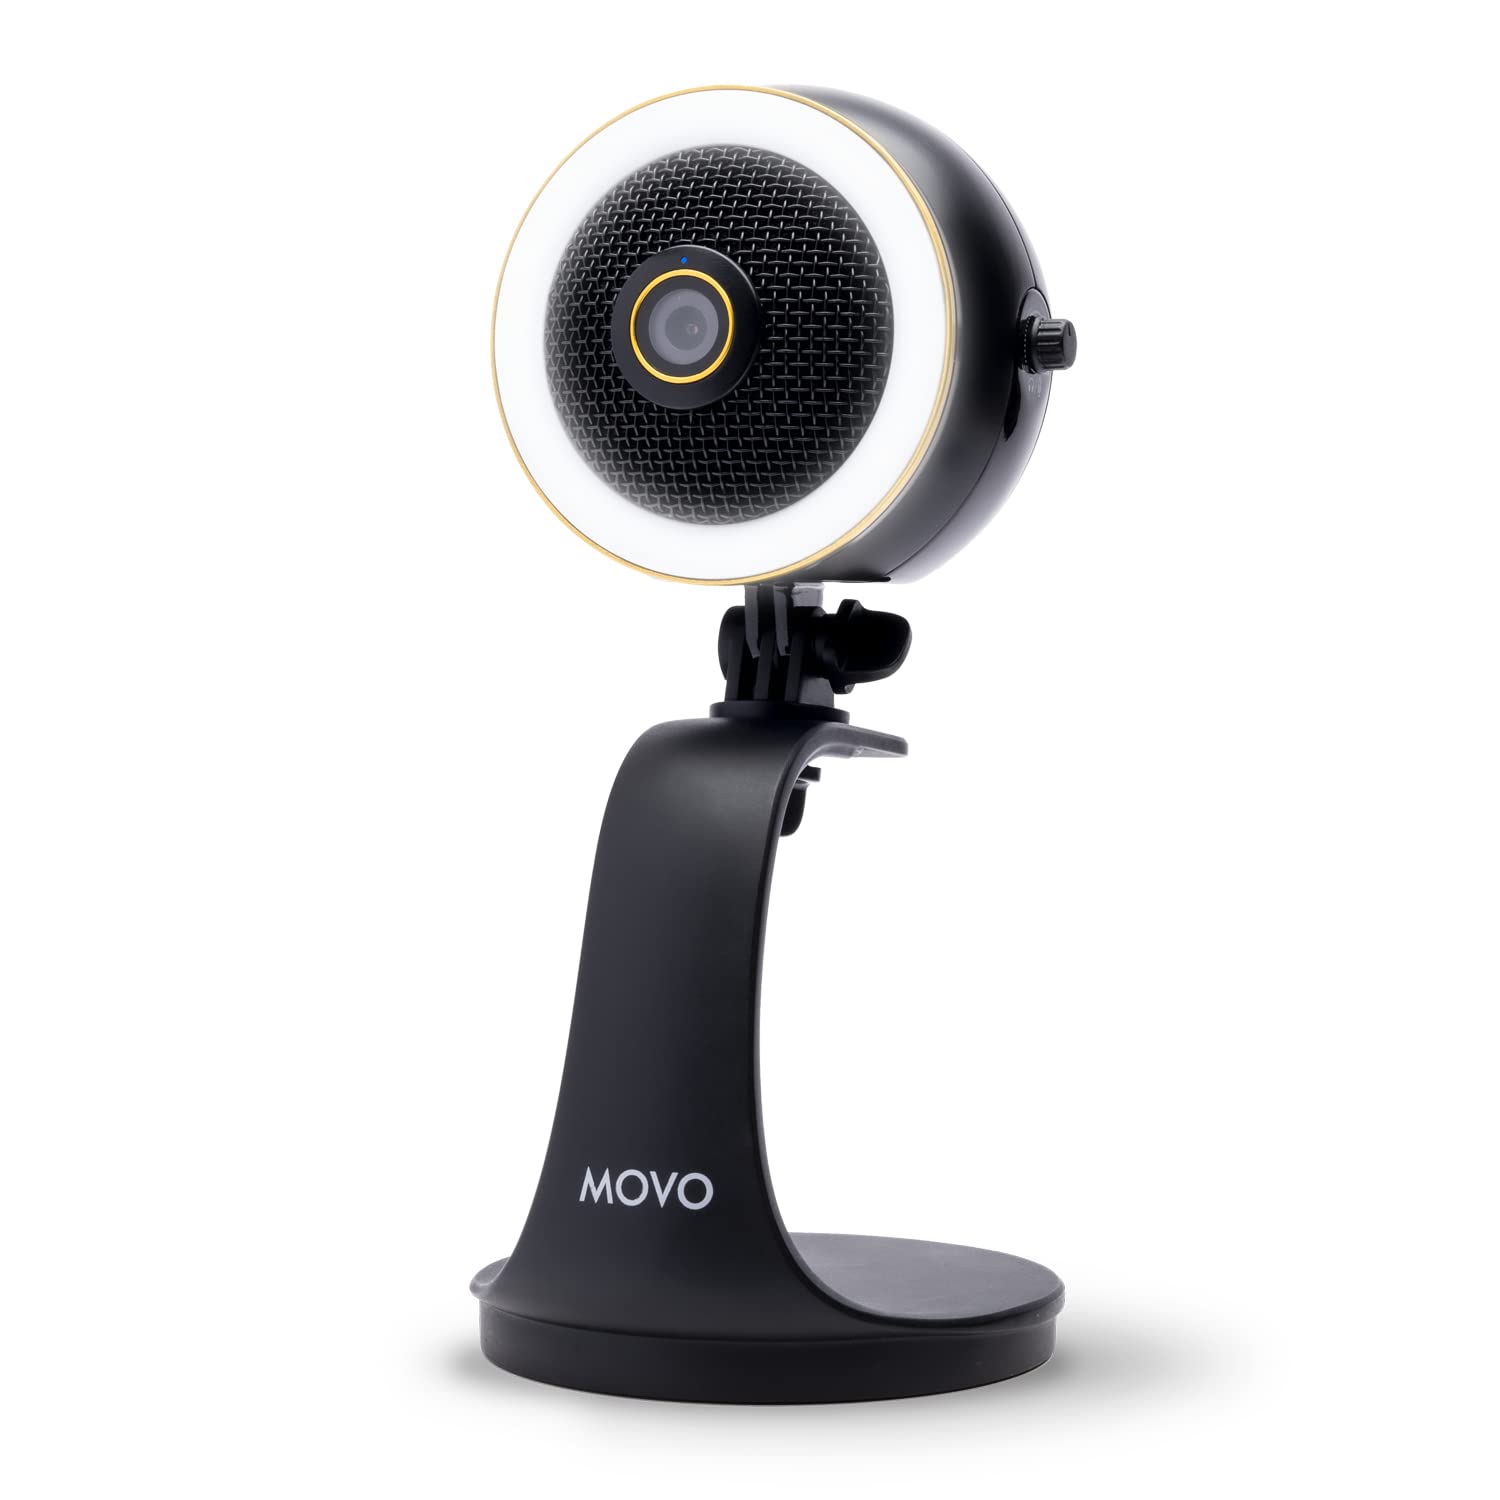 Movo WebMic HD Pro All-in-One Webcam with Mic and Ring Light  - Very Good